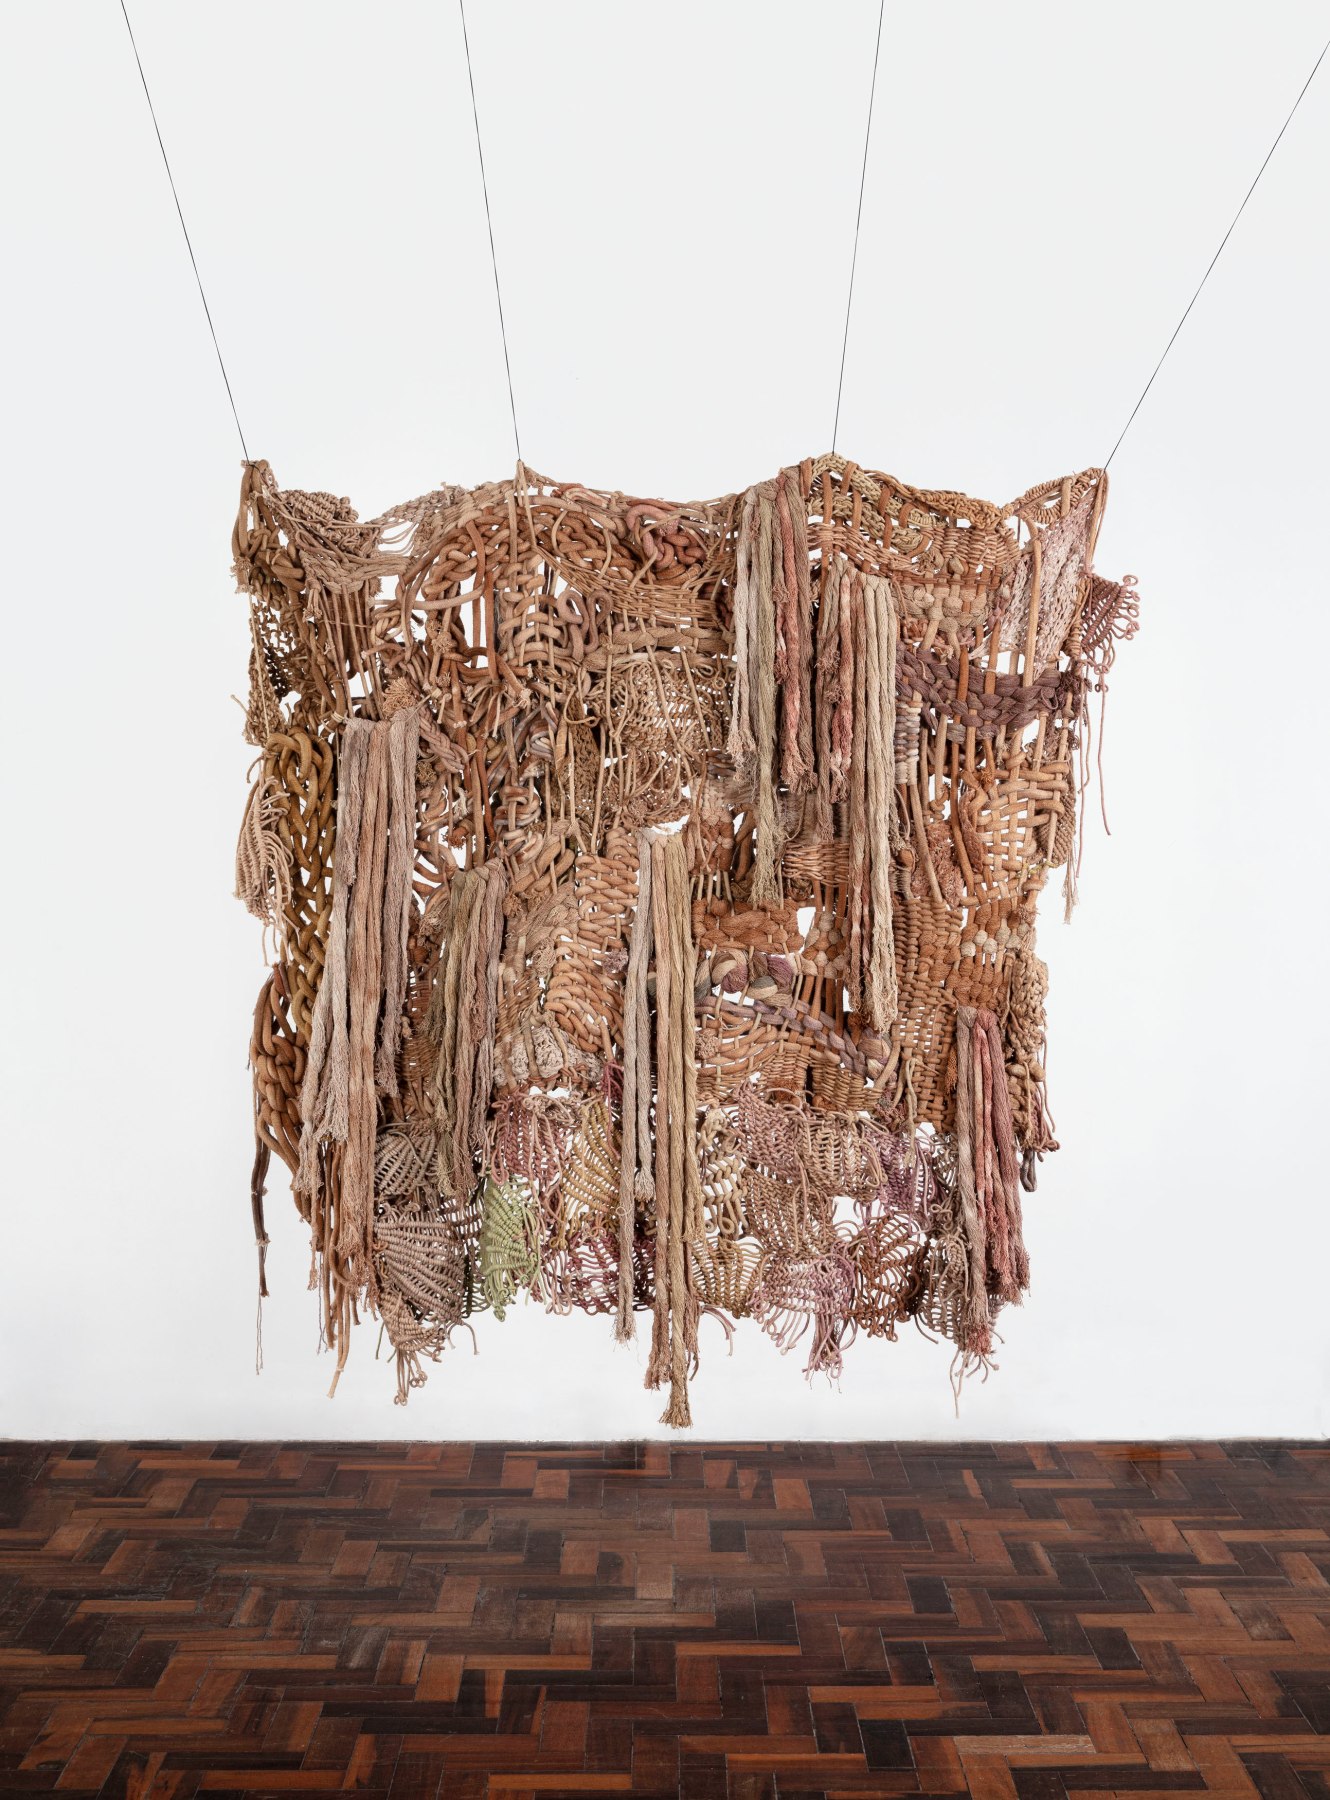 Laura Lima | How To Eat The Sun and The Moon - Goodman Gallery Johannesburg - Viewing Room - Goodman Gallery Viewing Rooms